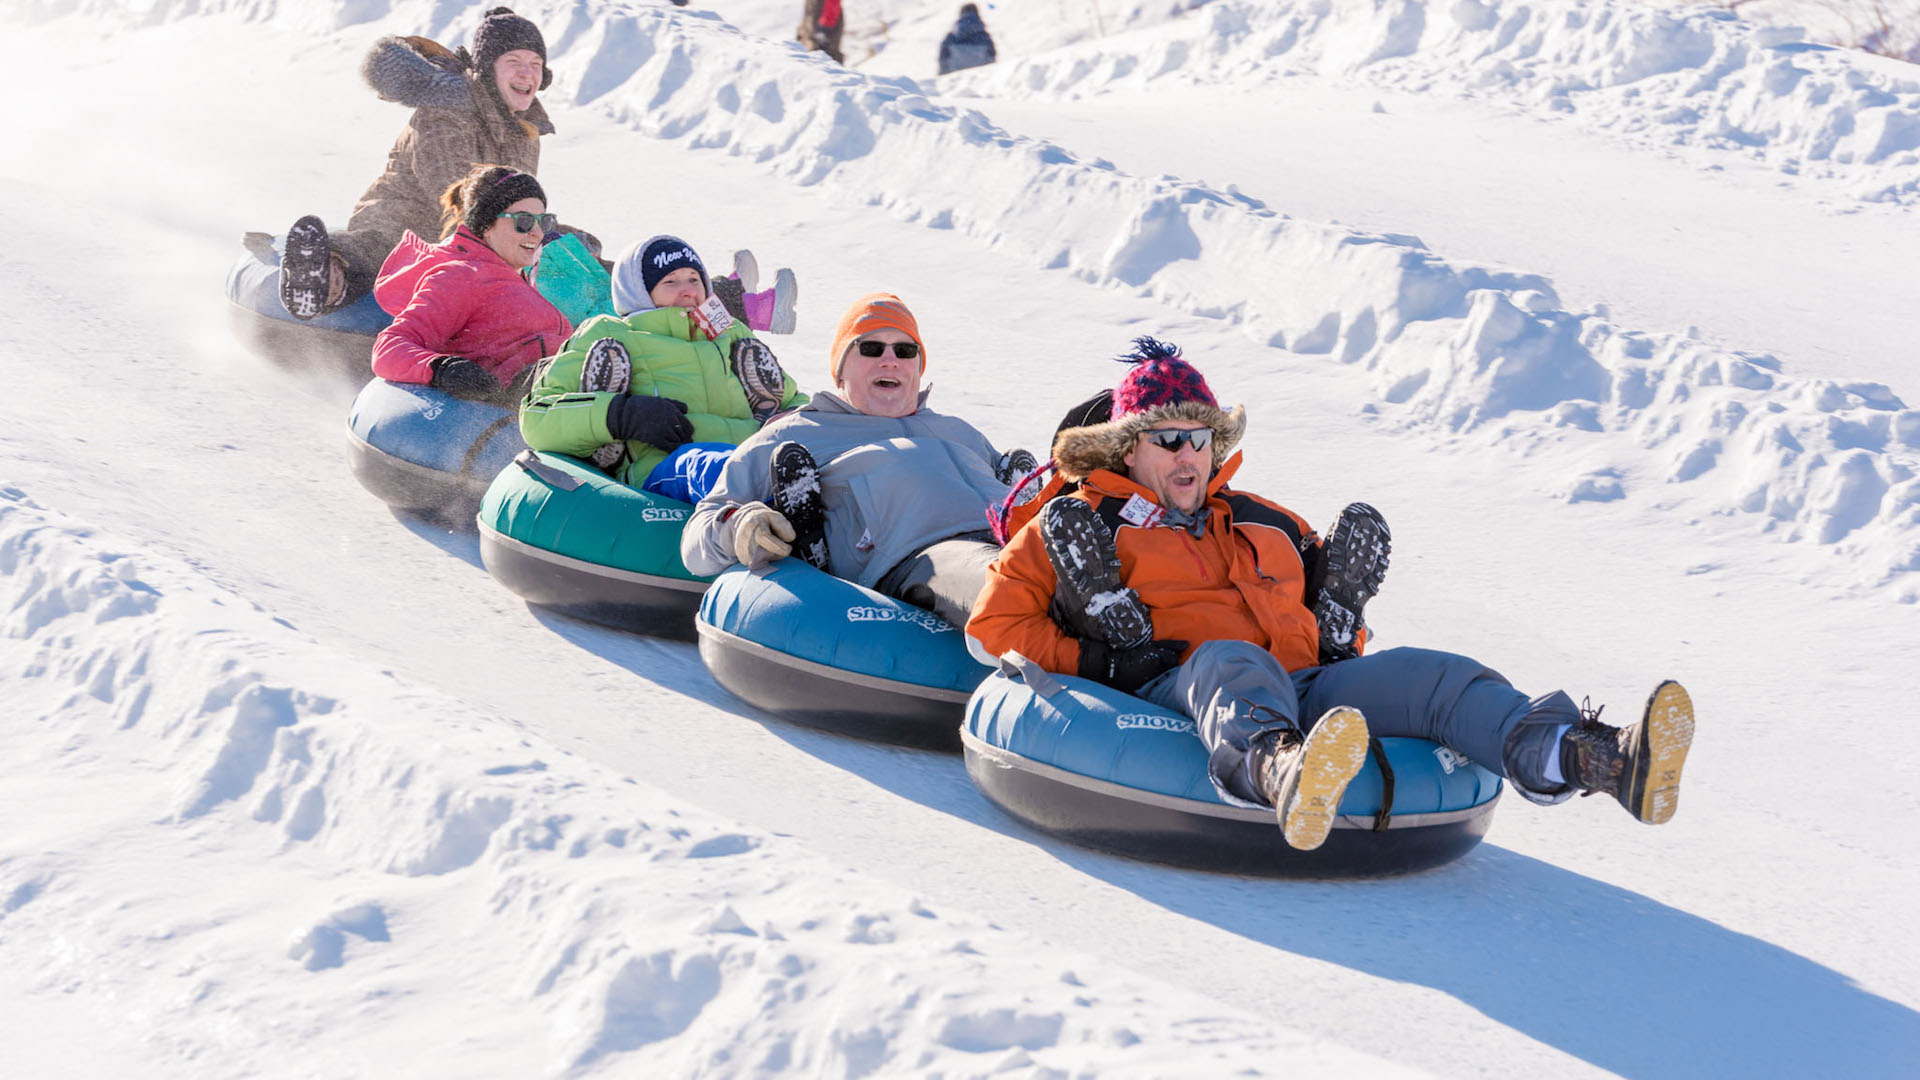 Literally, Join Your Family And Friends For Snow Tubing Fun! 